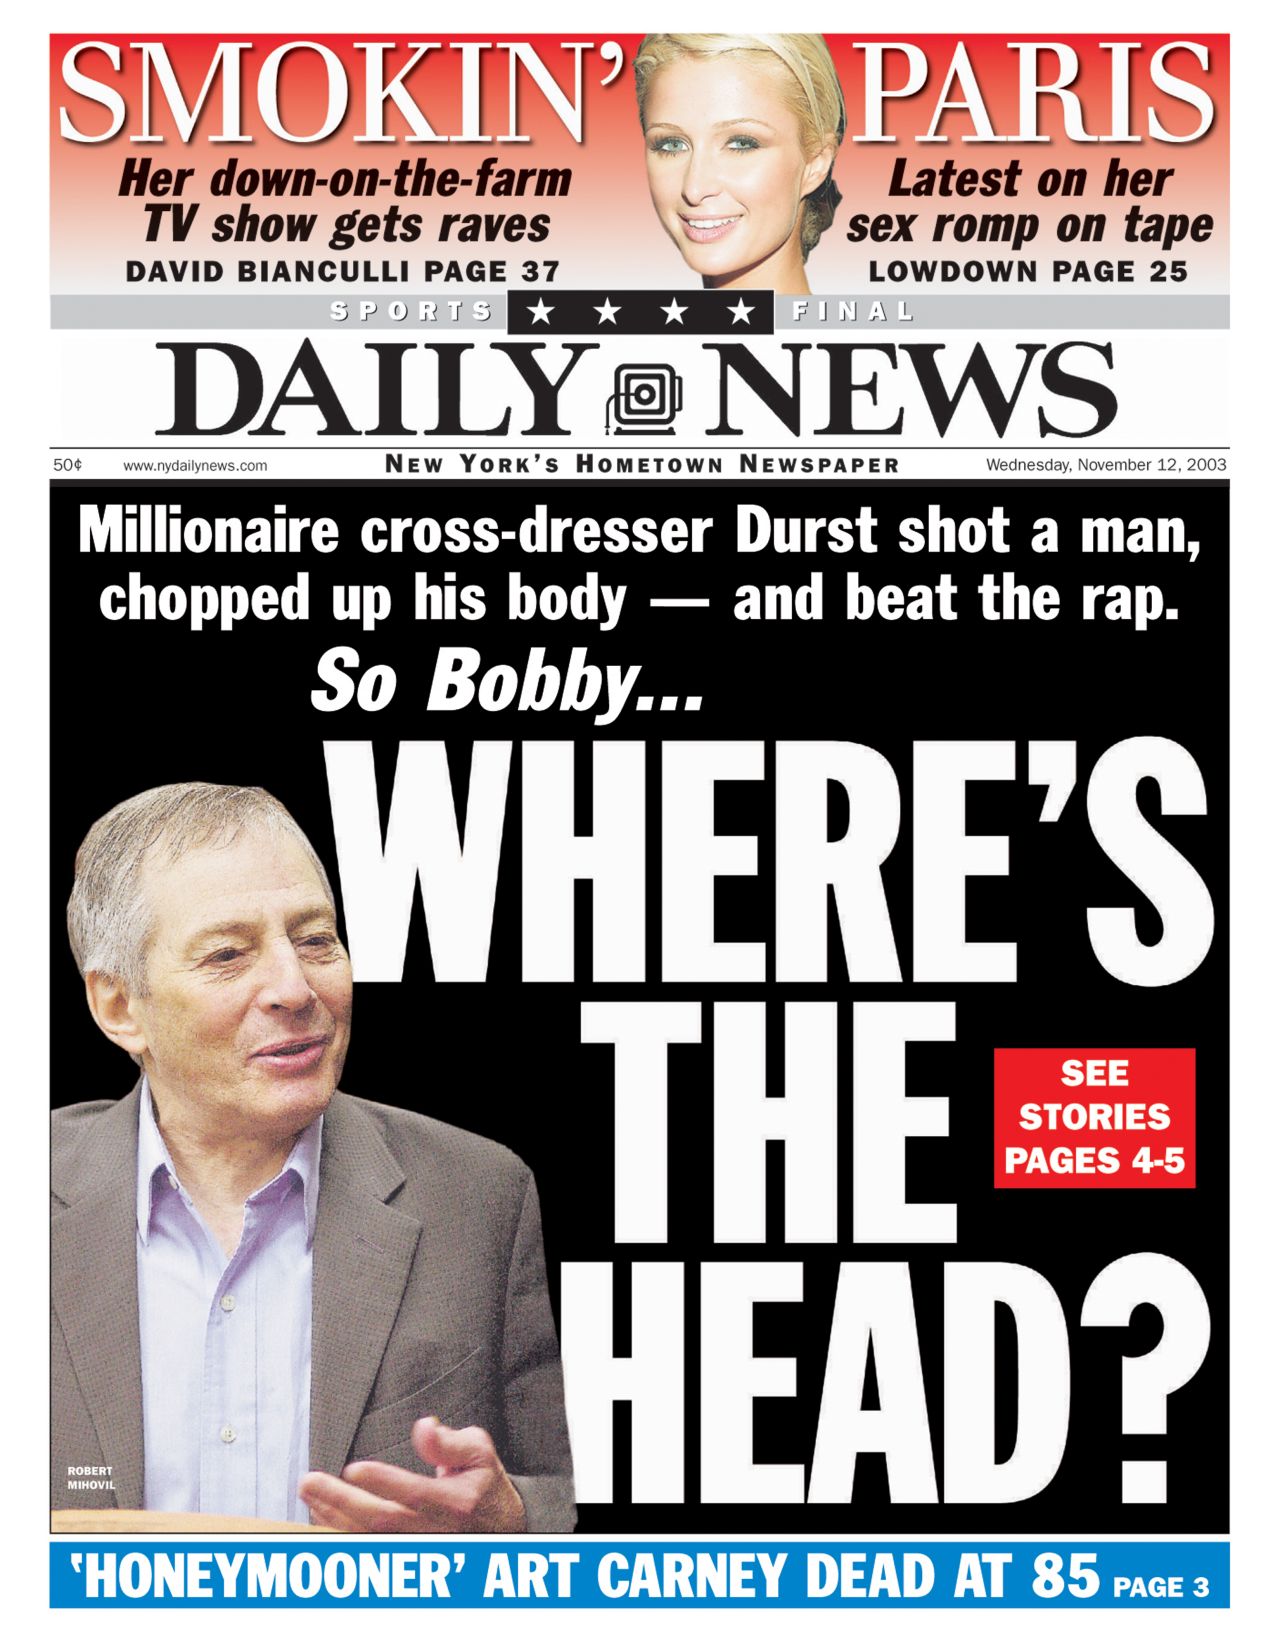 Durst is featured on the front page of the New York Daily News on November 12, 2003.